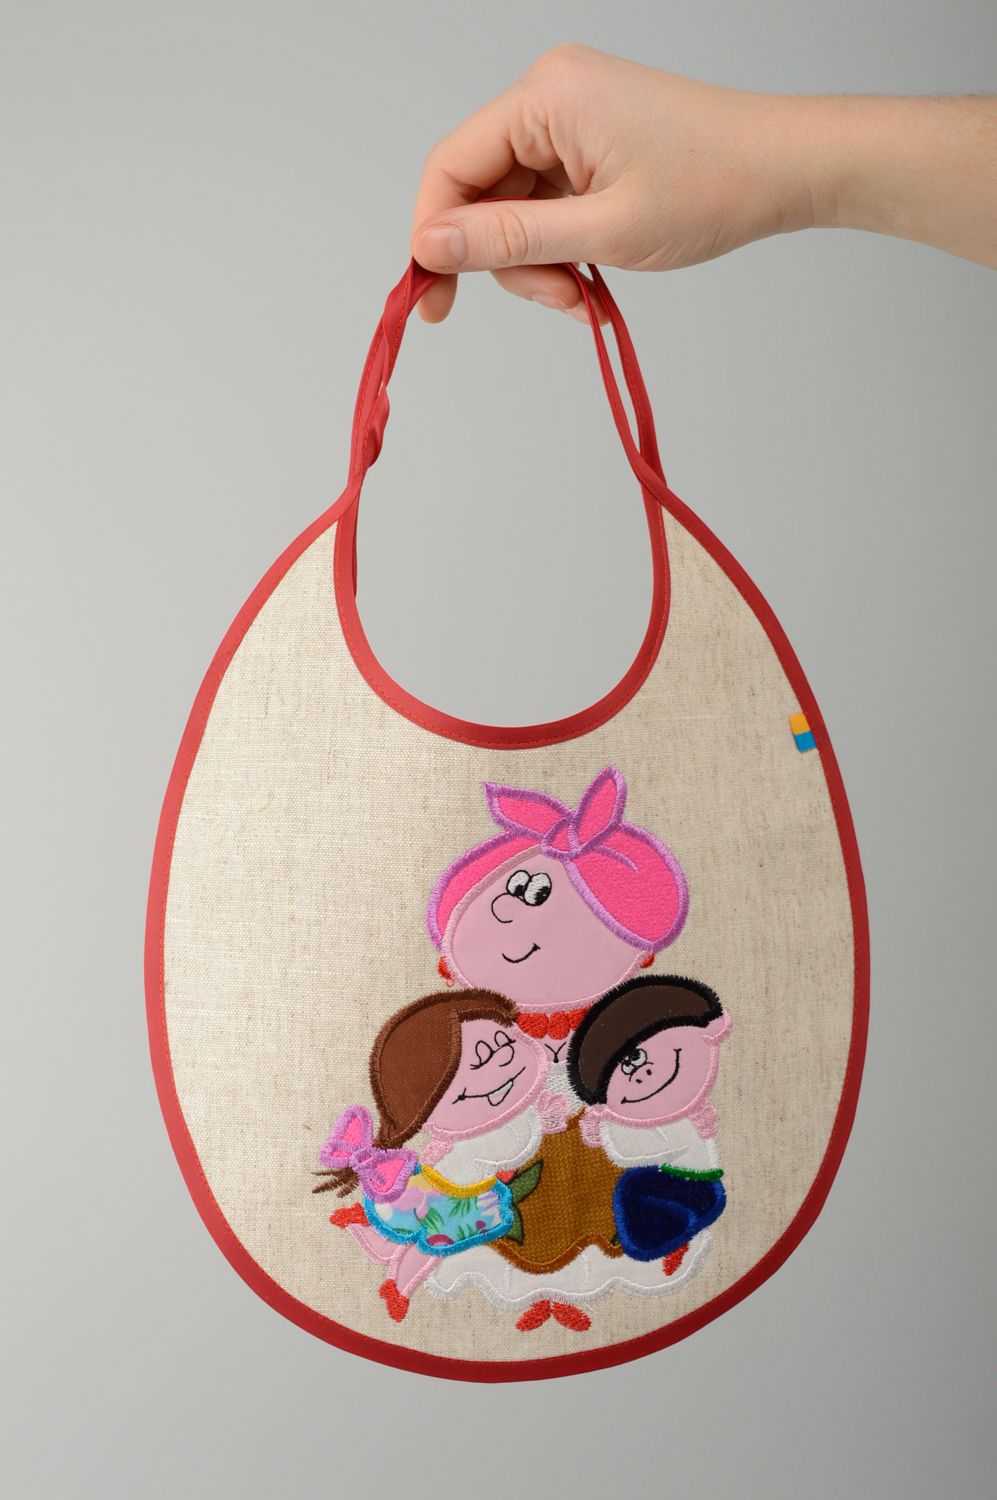 Children's linen bib with embroidery and applique work photo 4